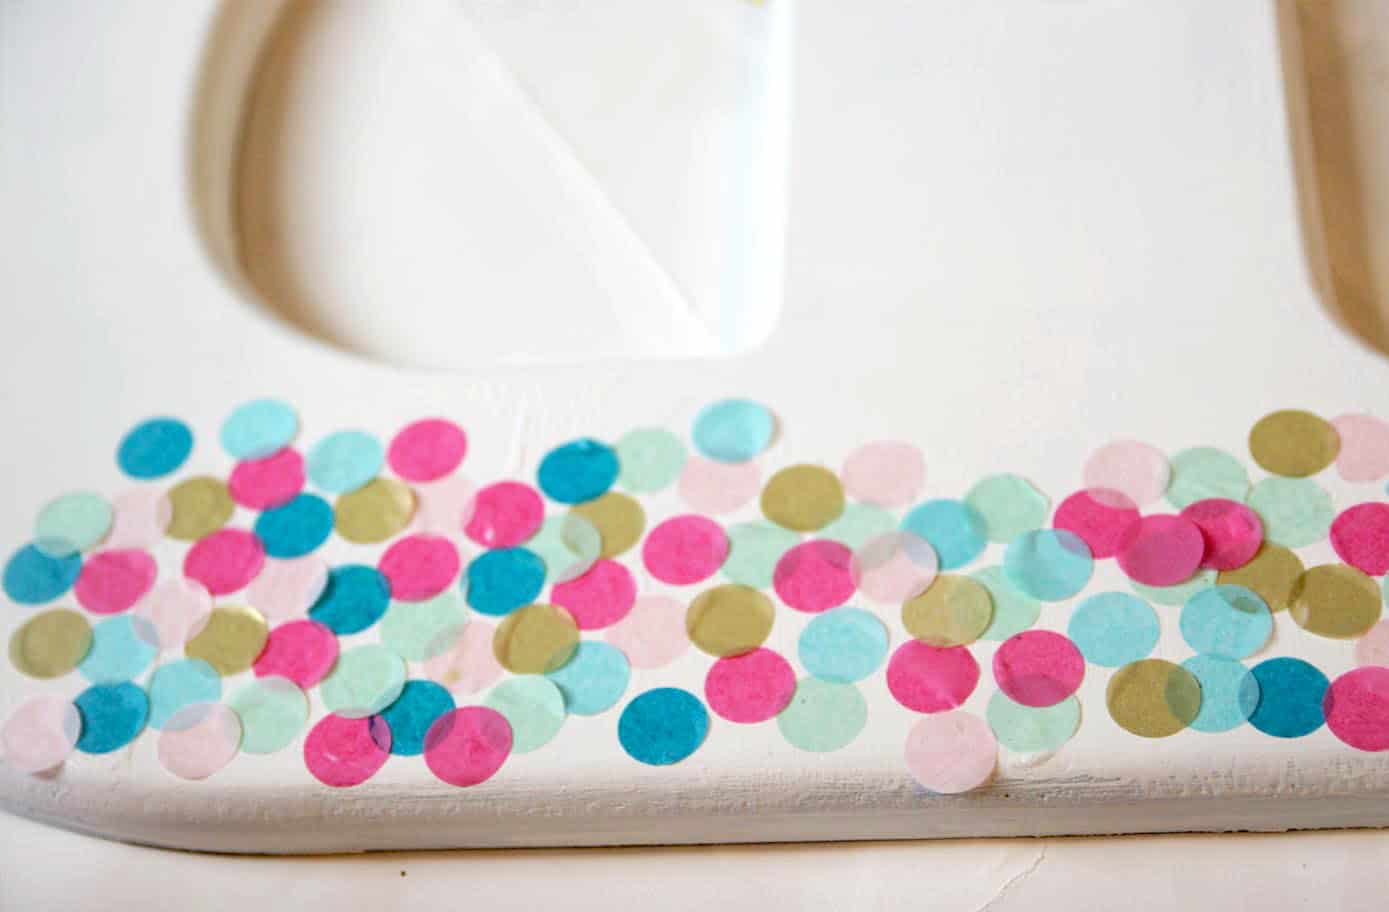 Colorful confetti being applied to a wood surface with Mod Podge